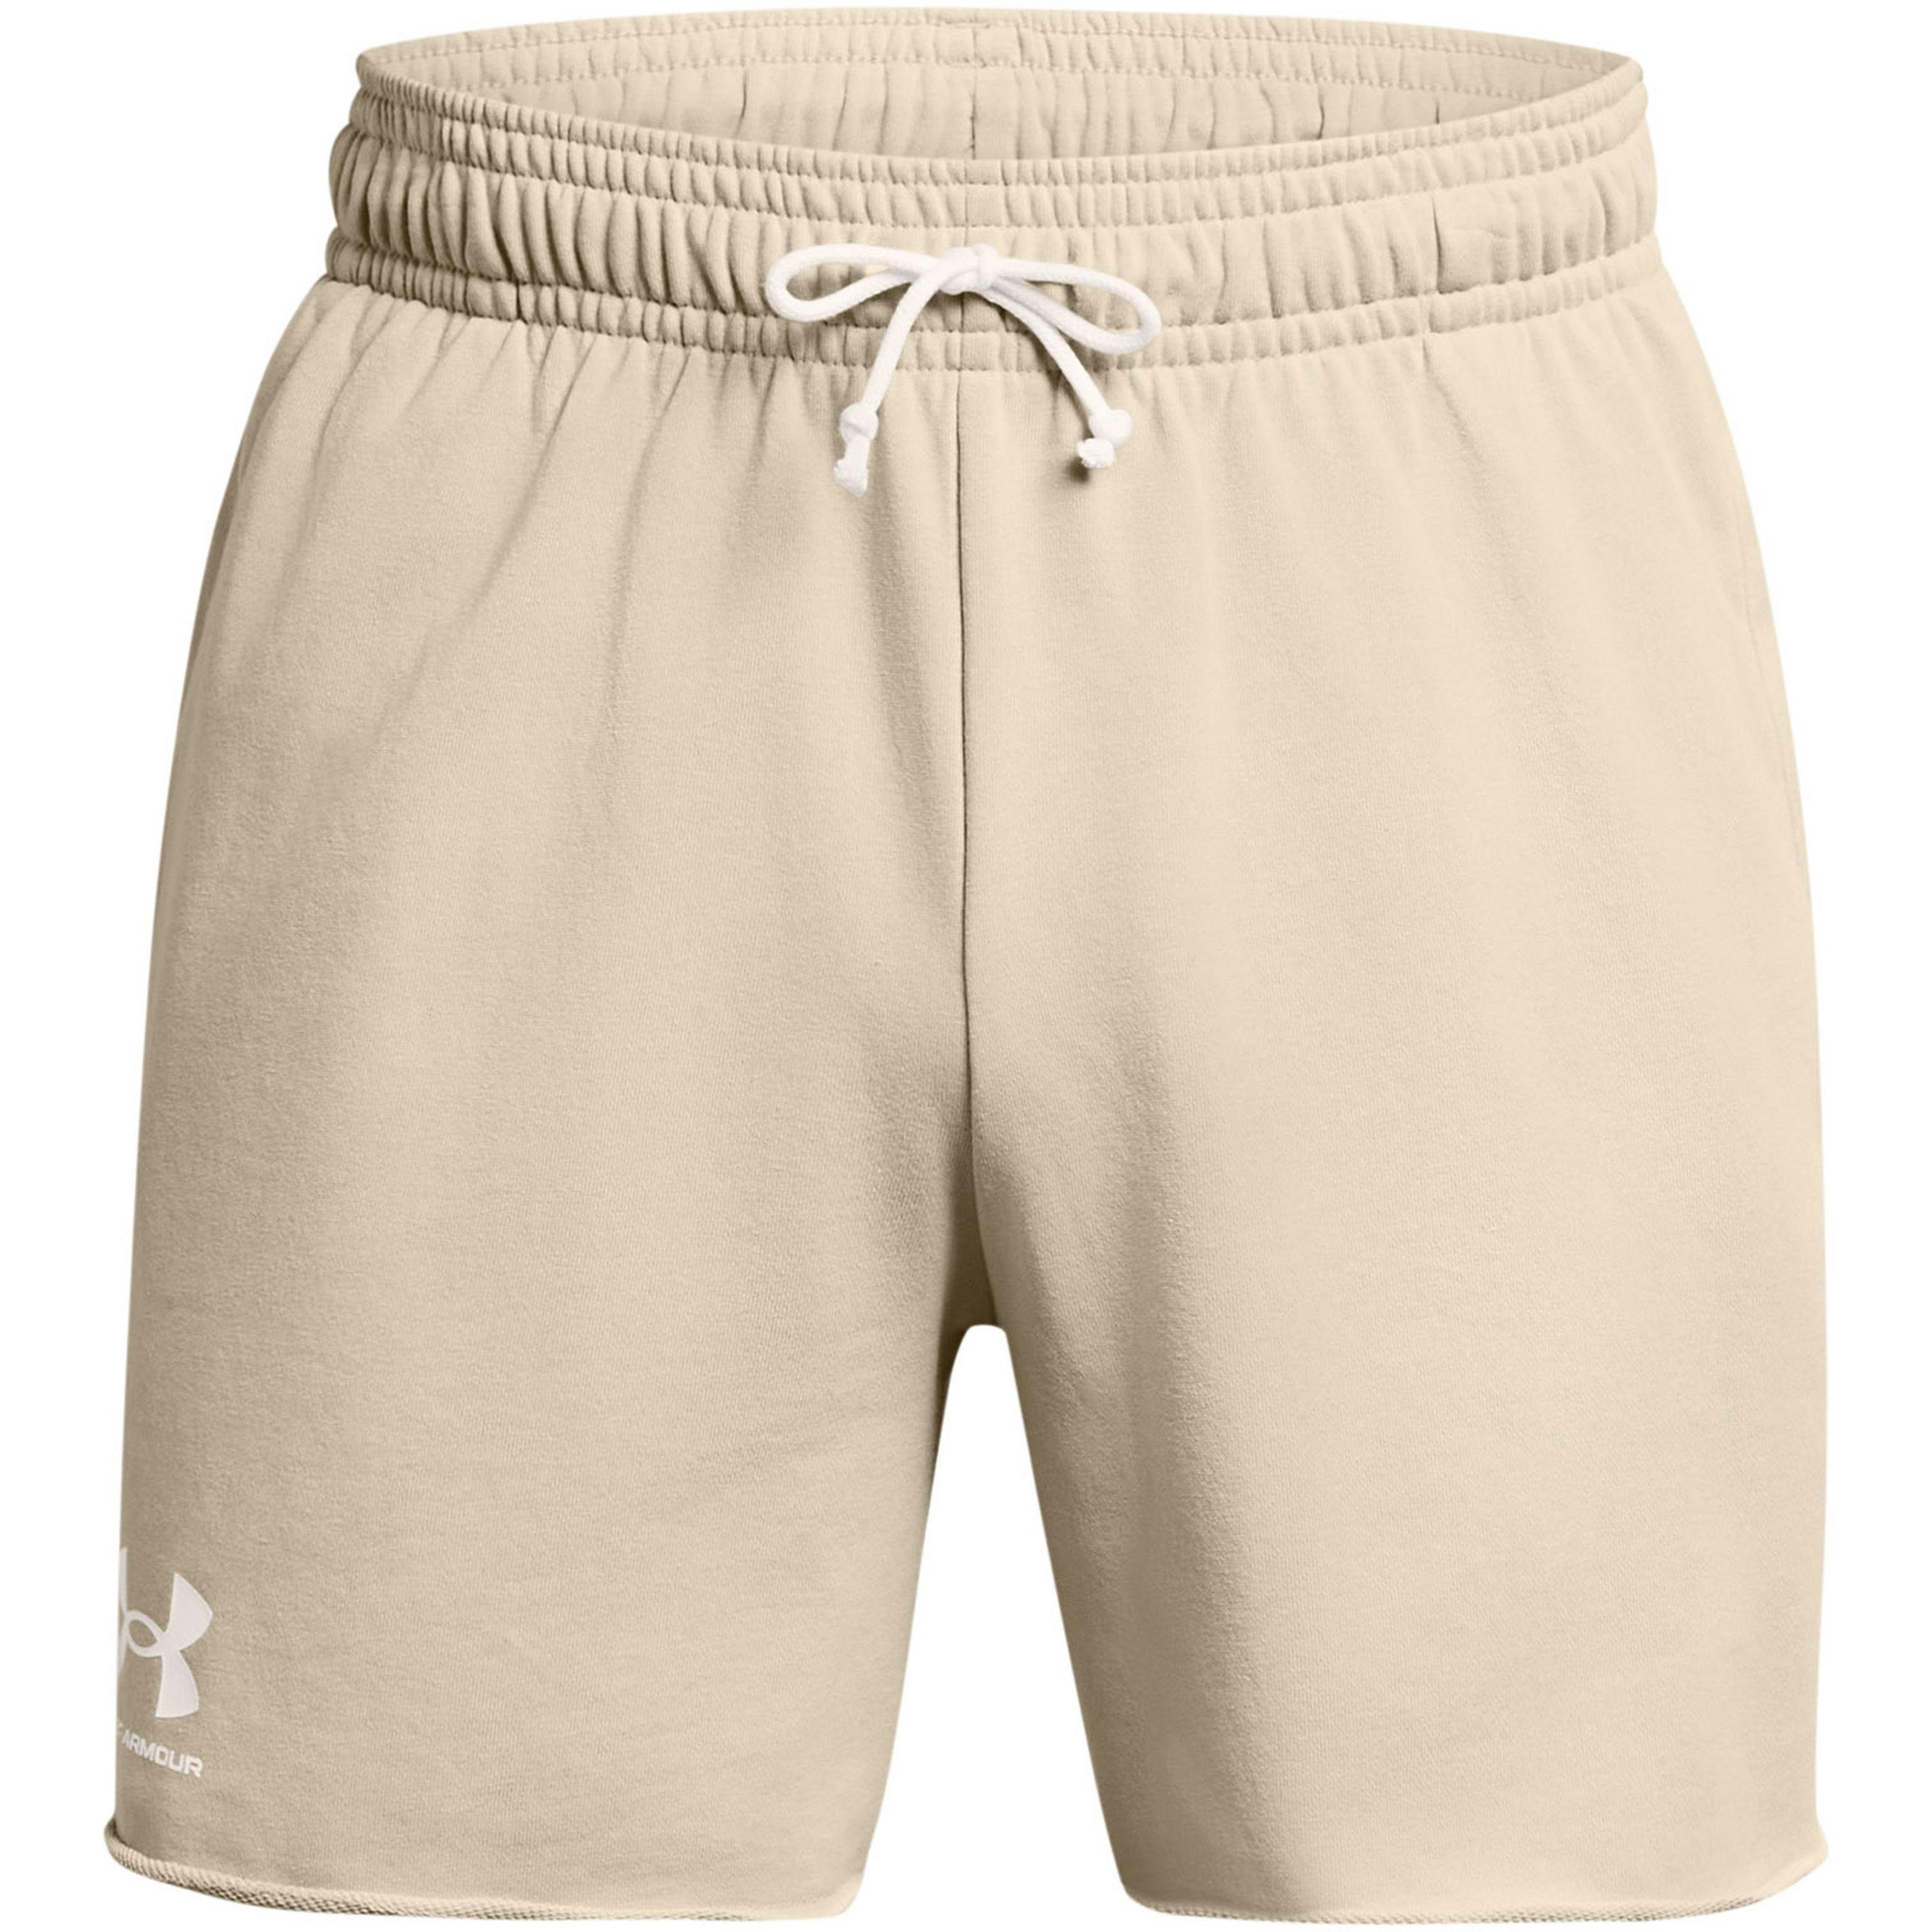 Under Armour® Sweatshorts Rival Terry